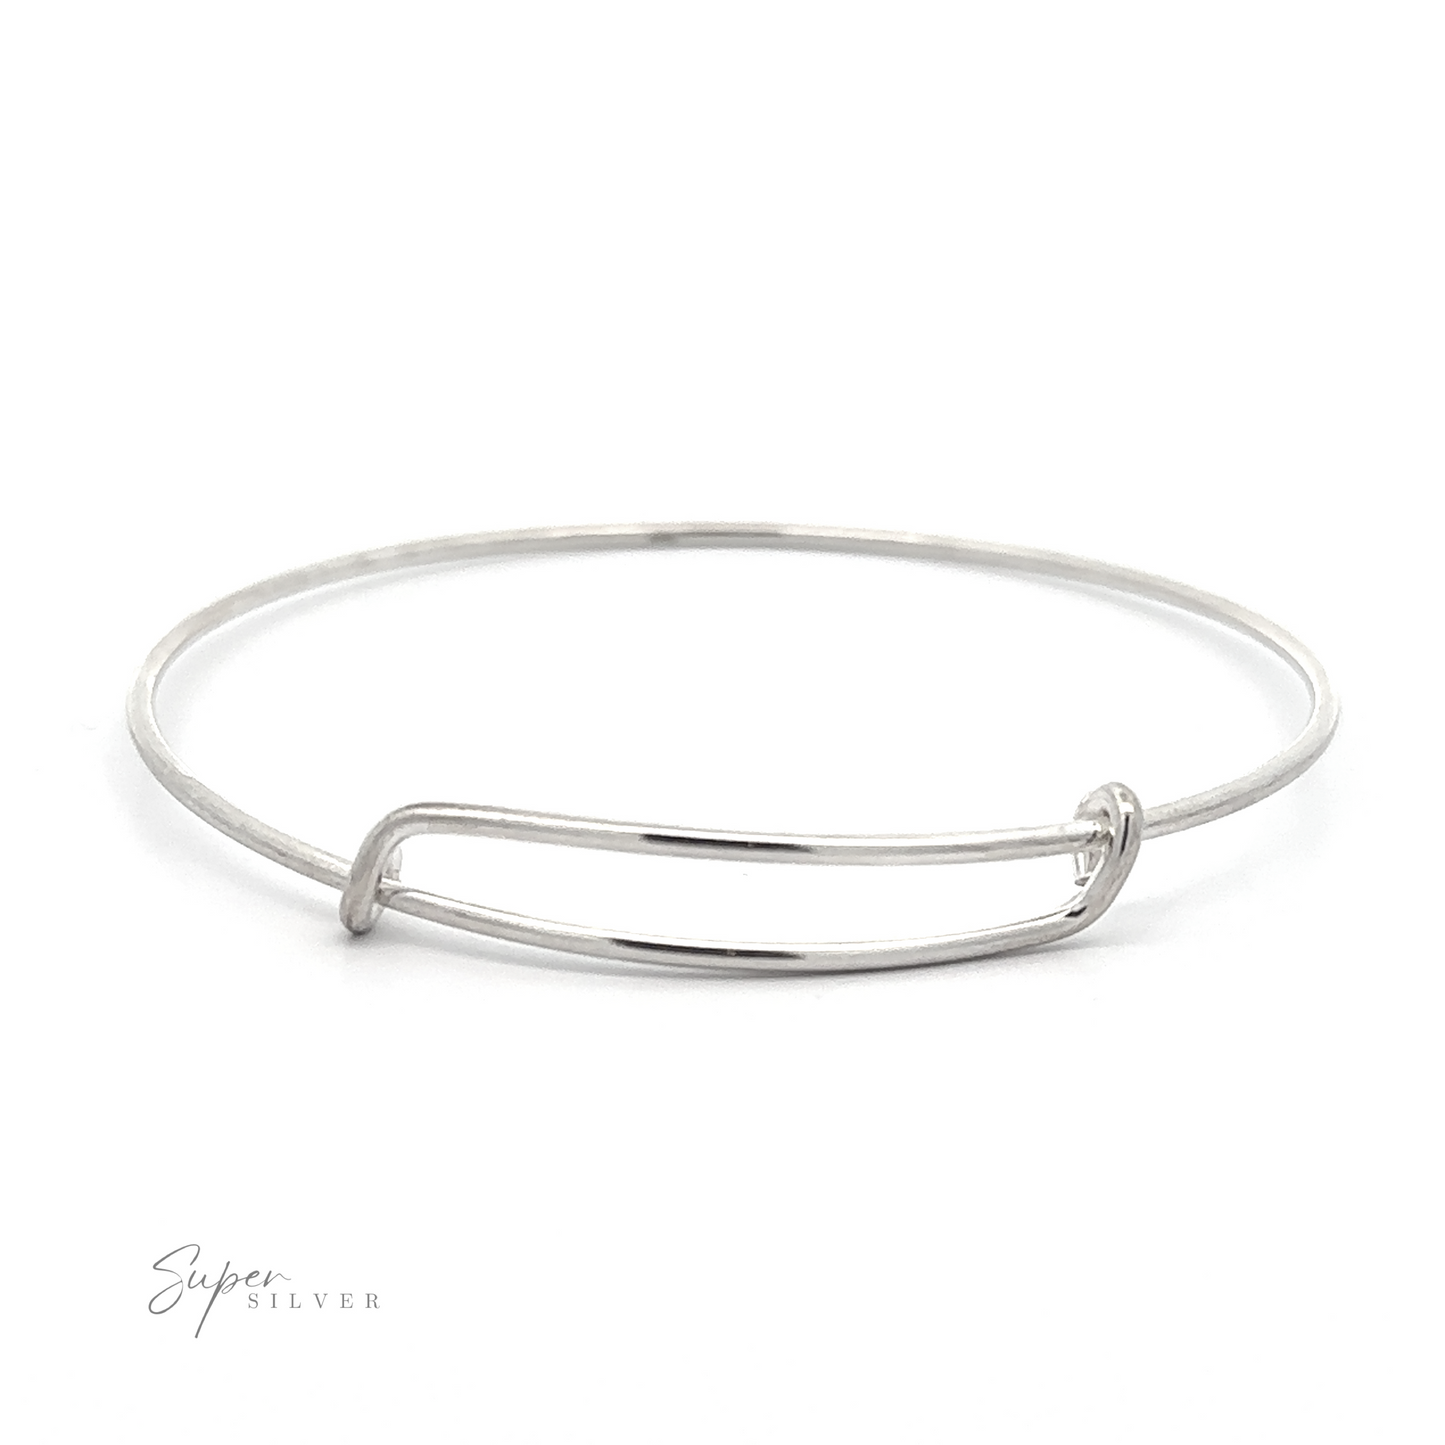 
                  
                    A minimalist Simple Adjustable Bangle Bracelet with a simple, sleek design and a small, rectangular detail. The word "Super Silver" is visible in the corner.
                  
                